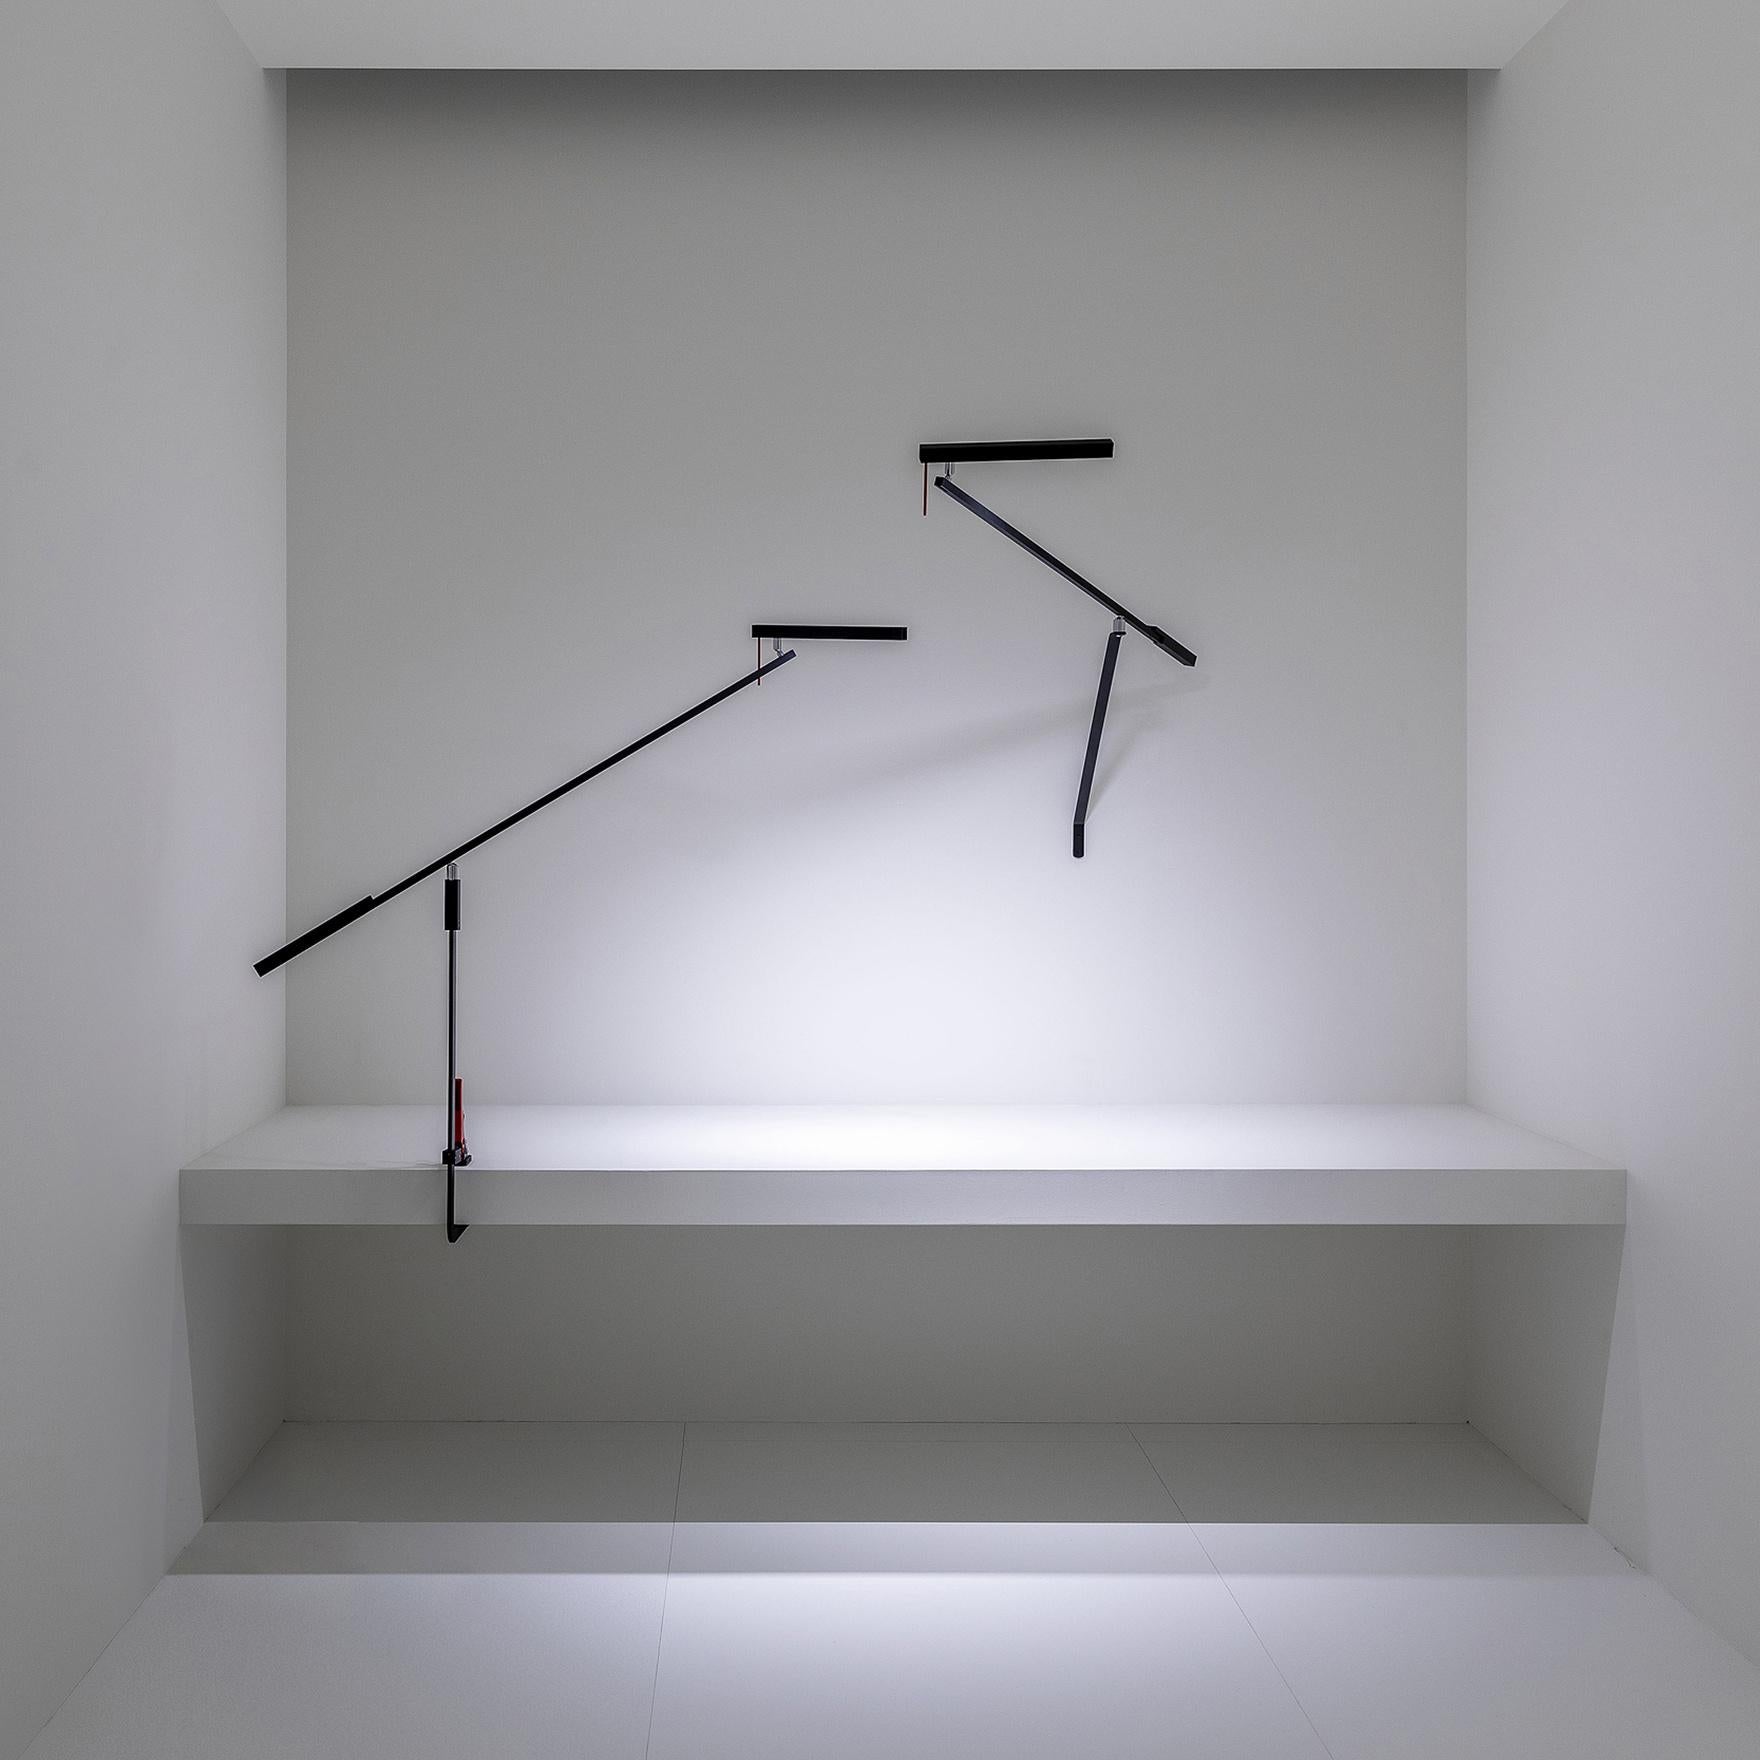 A lamp that can be positioned, balanced and turned,
but overall it produces a beautiful light on the table.
It's the wall version of the Morsetto lamp. Three adjustable arms allow the light source to be positioned far from where the lamp is